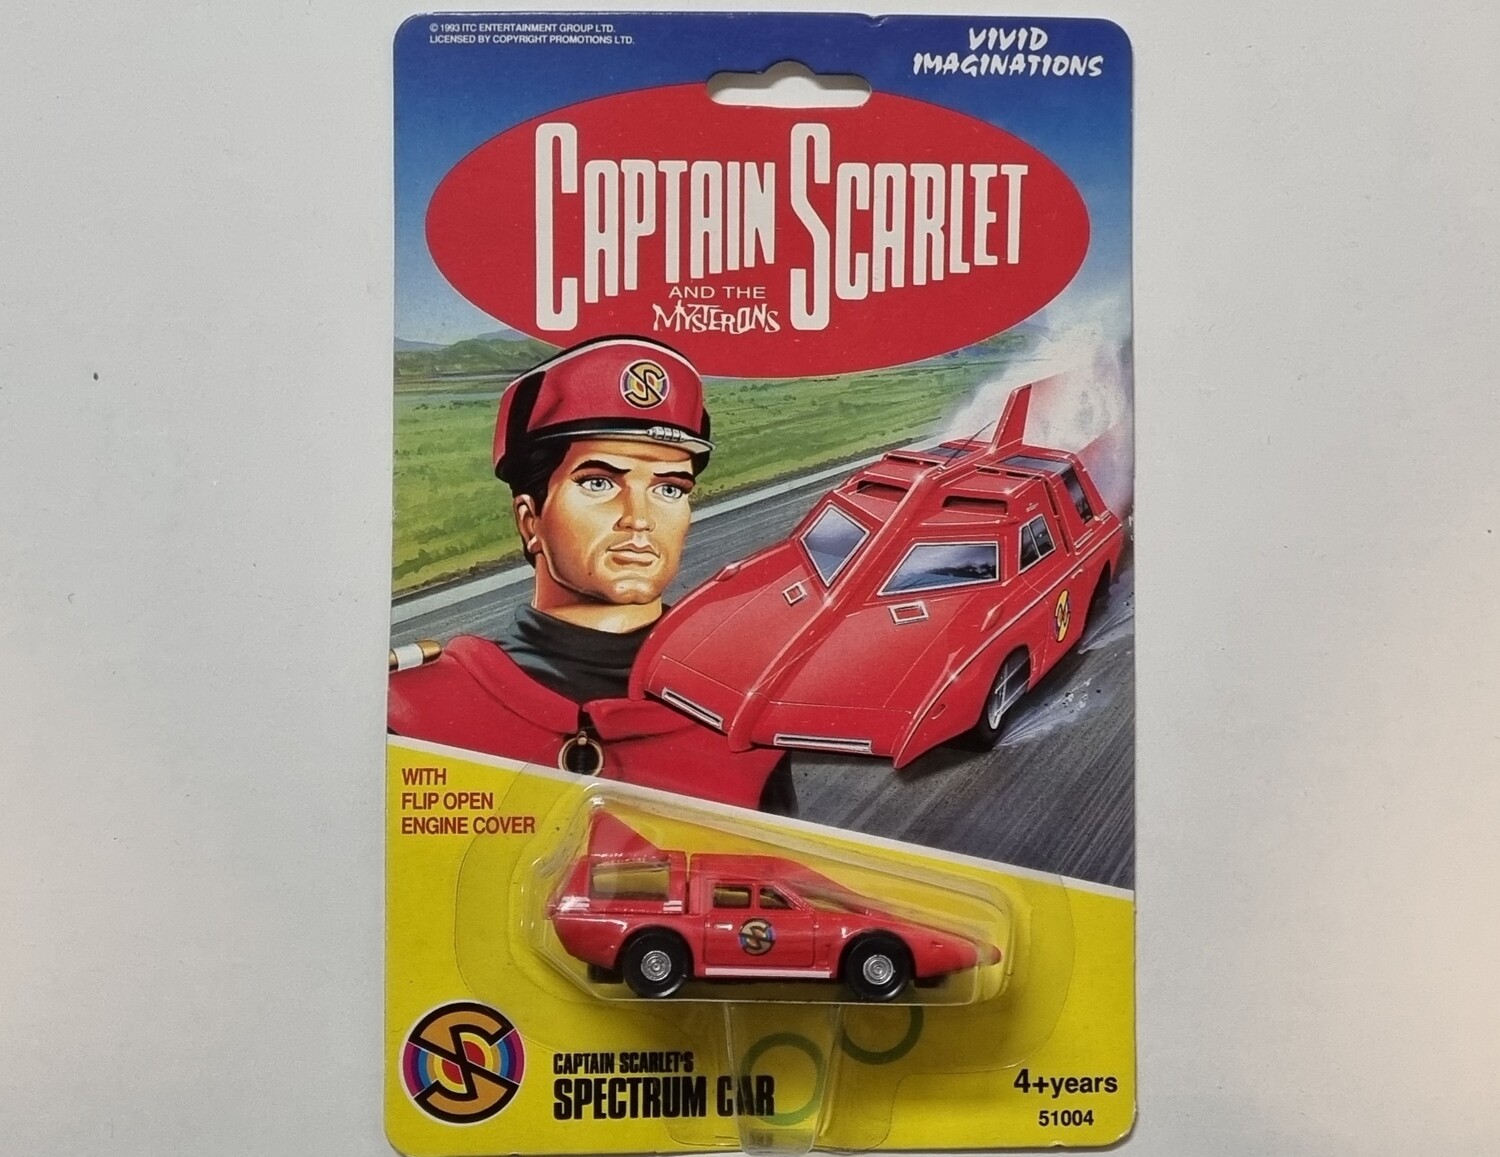 Captain Scarlet's Spectrum Car with flip open engine cover, Captain Scarlet and the Mysterions